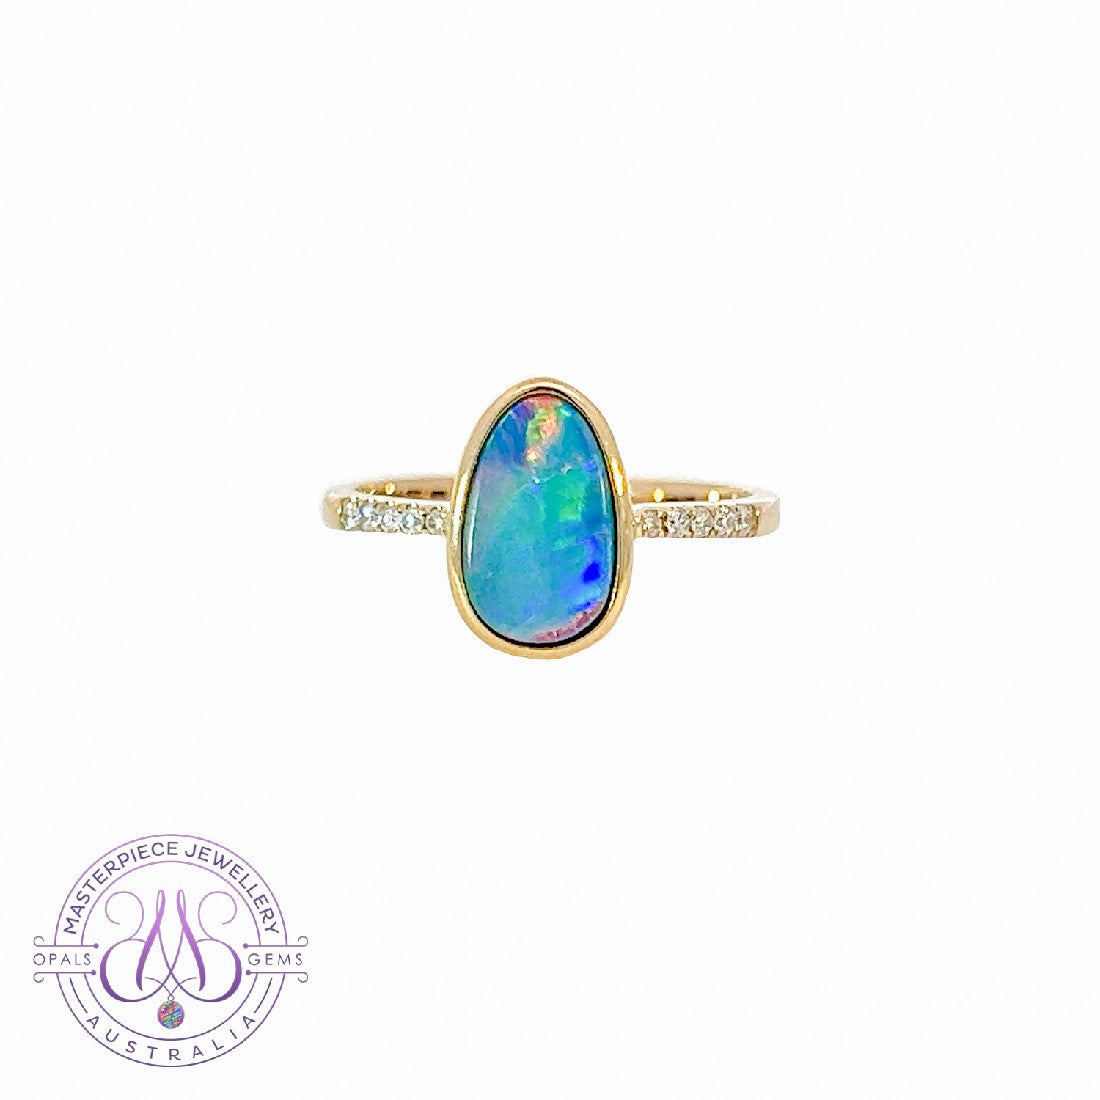 14kt Yellow Gold Opal doublet red green flash and diamond band ring - Masterpiece Jewellery Opal & Gems Sydney Australia | Online Shop